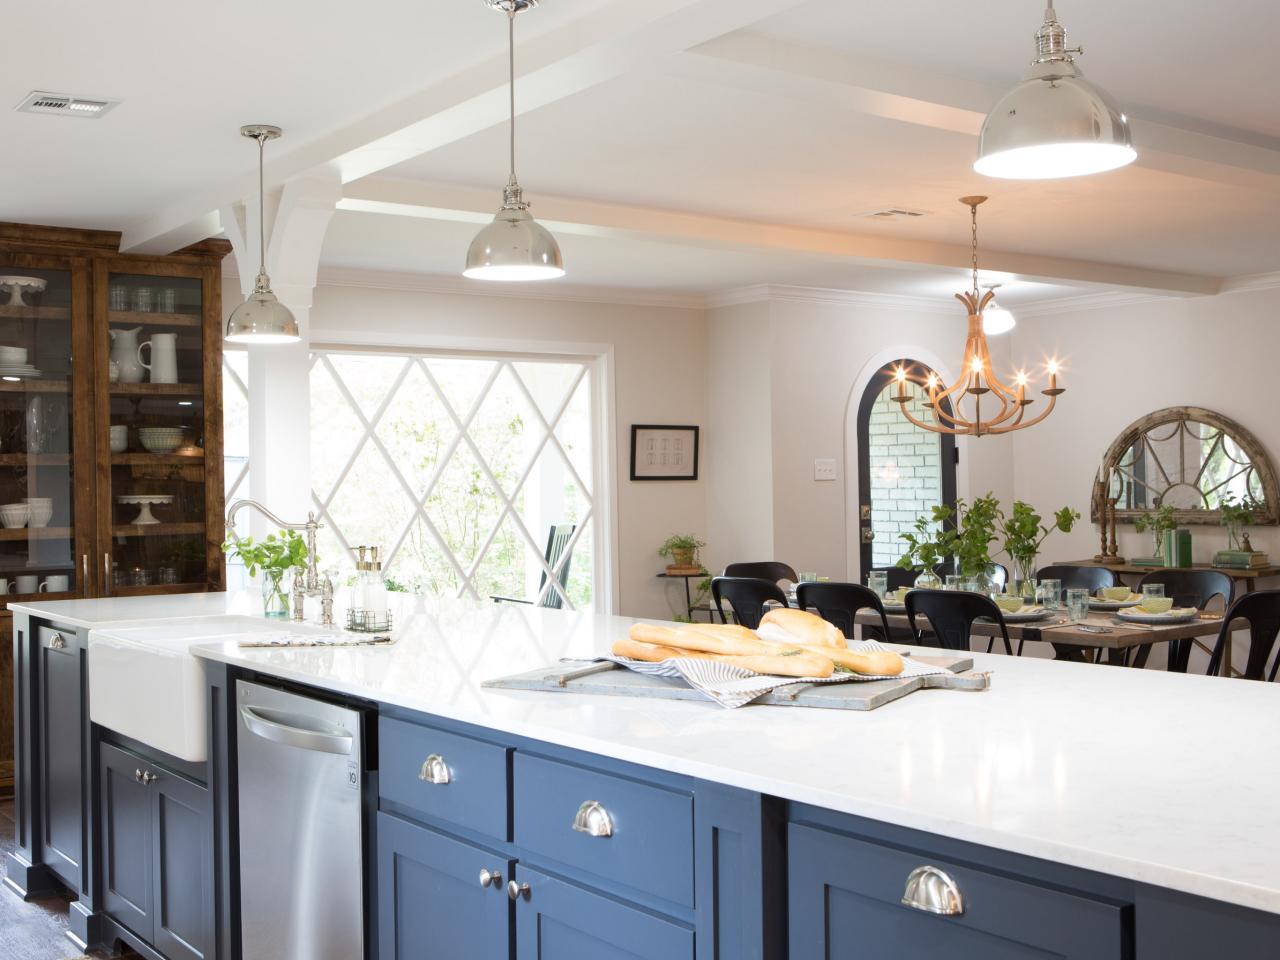 A kitchen island in a home on HGTV's 'Fixer Upper'